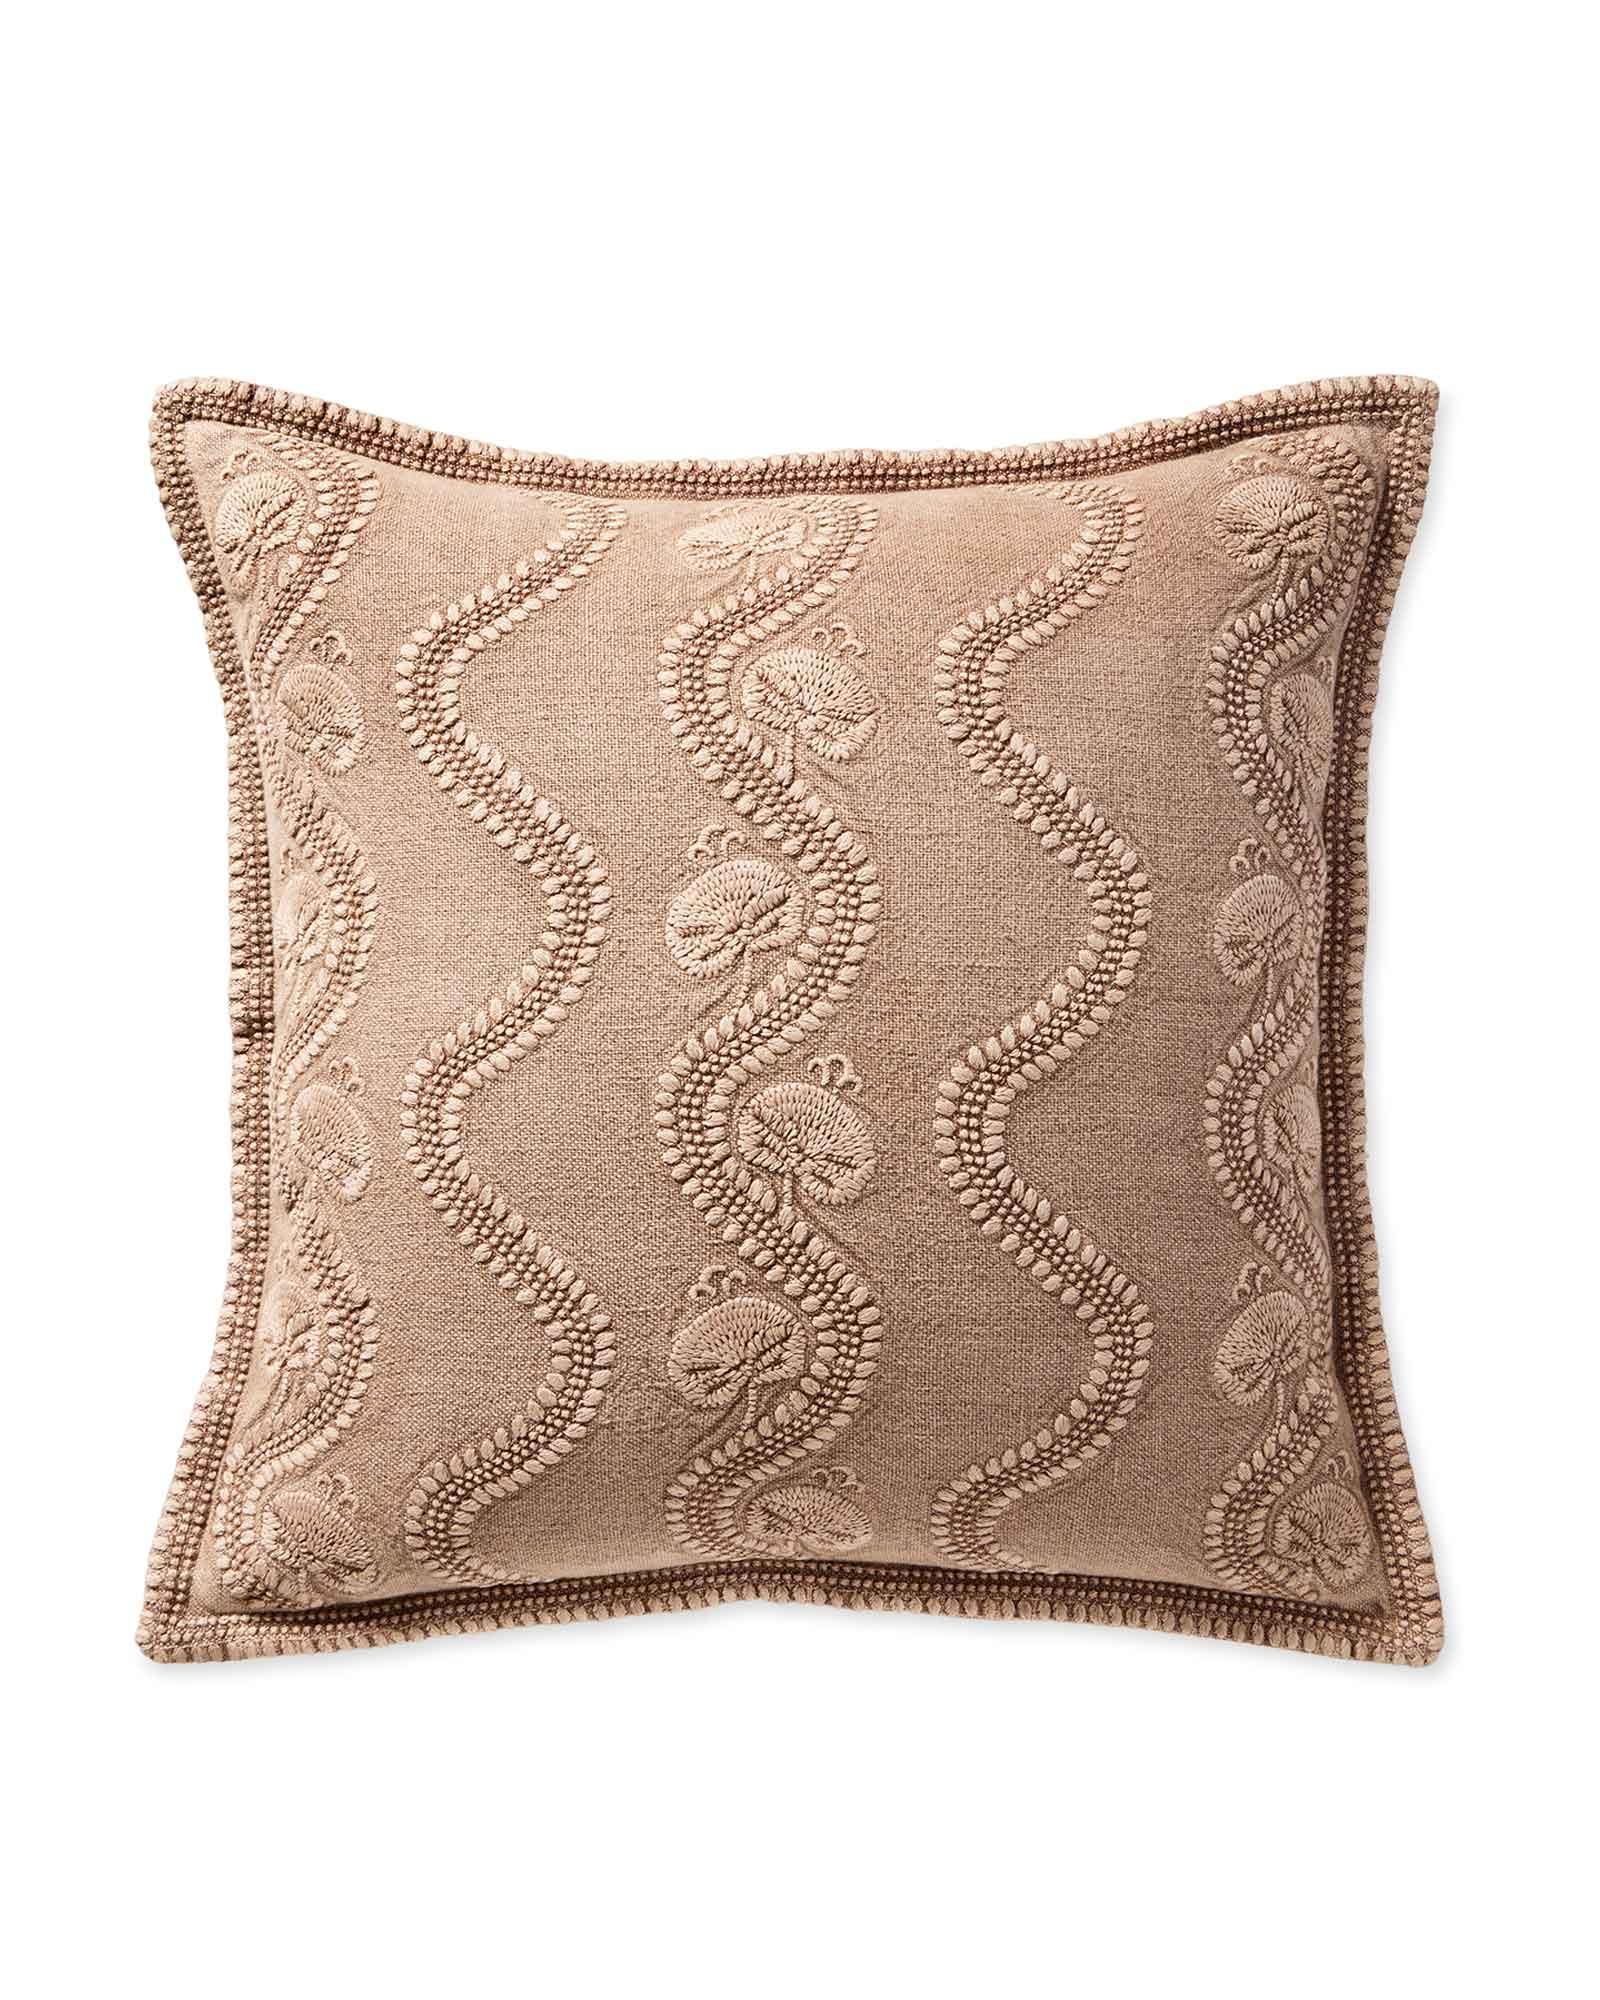 Fairhope Pillow Cover | Serena and Lily